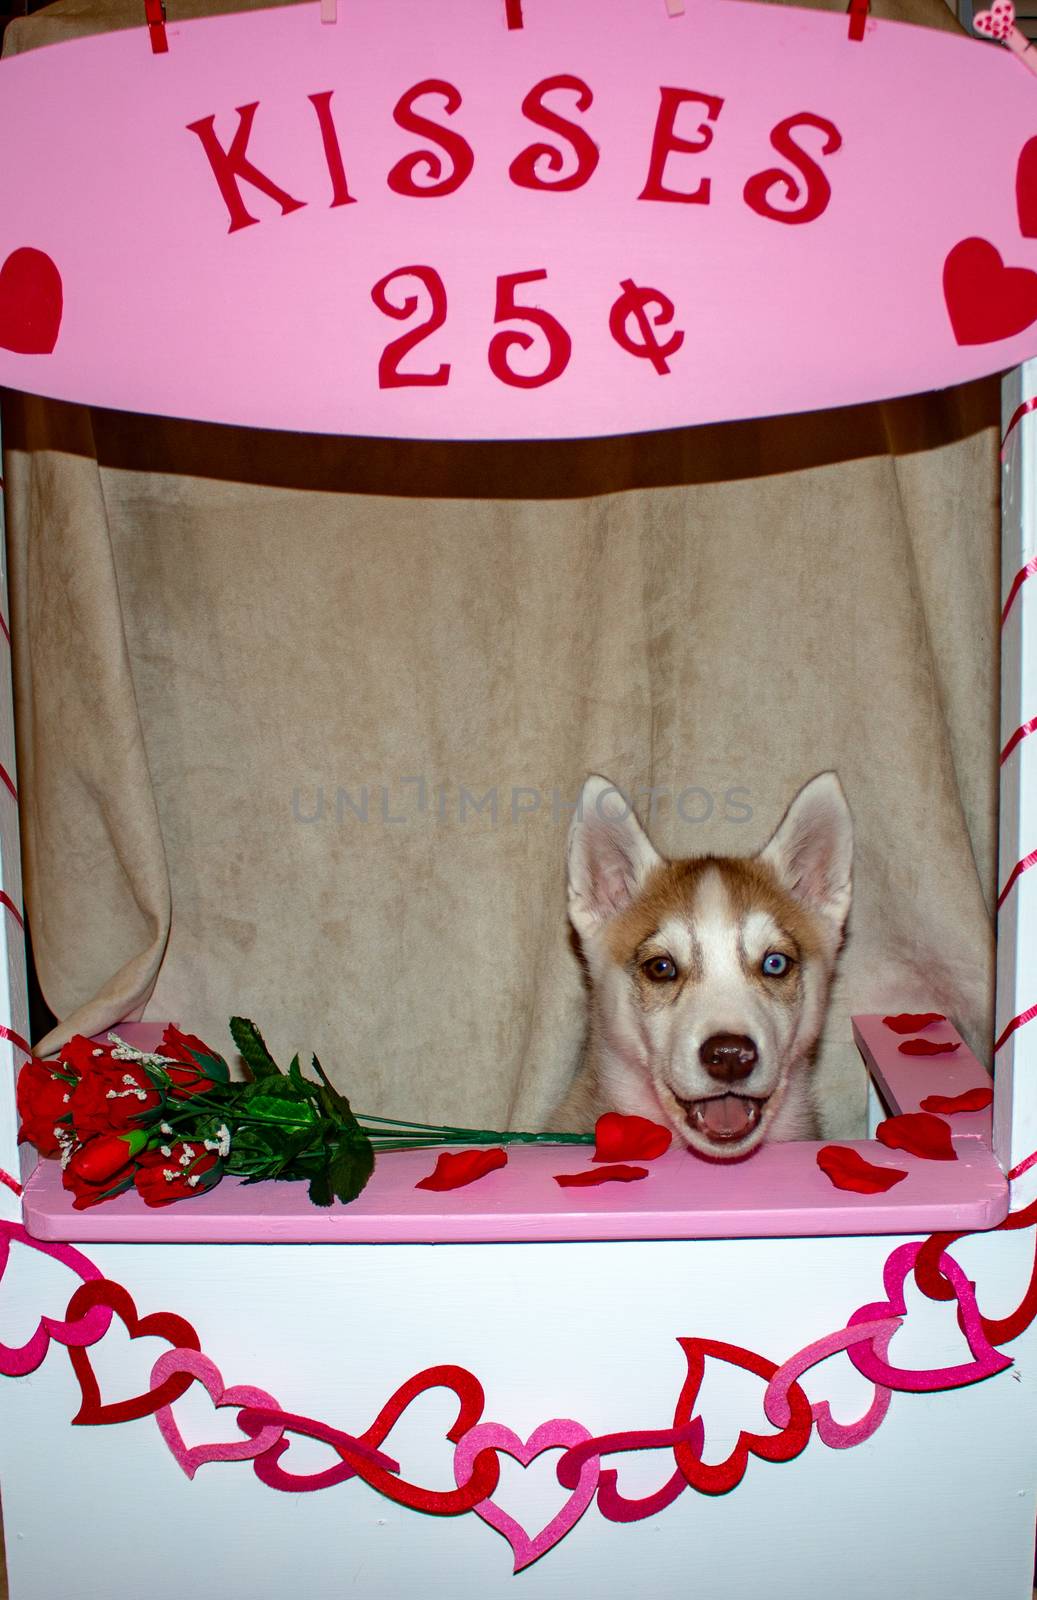 Dog in a Kissing Booth